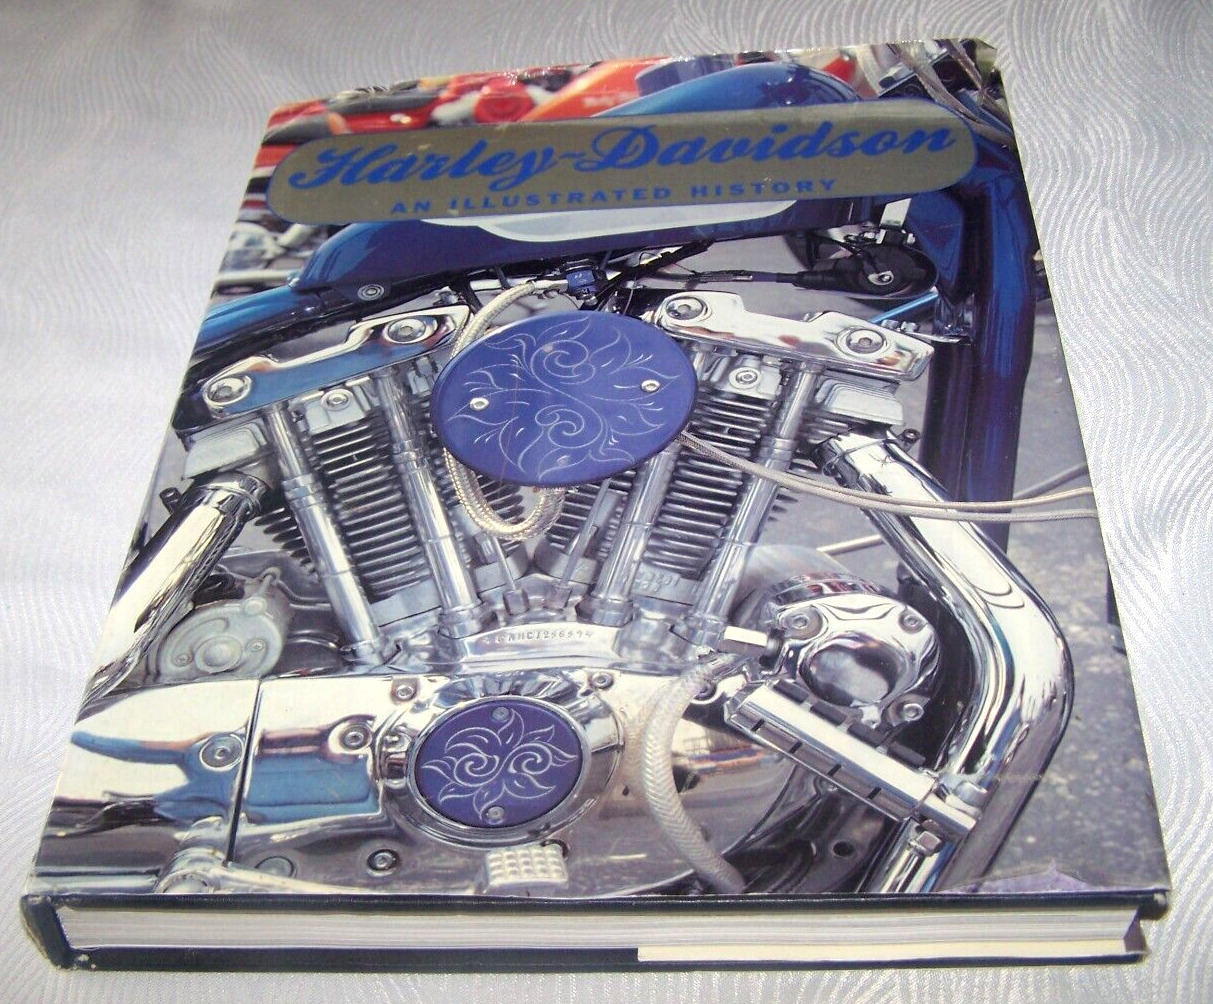 Harley-Davidson an Illustrated History Hardcover Barnes & Noble motorcycle